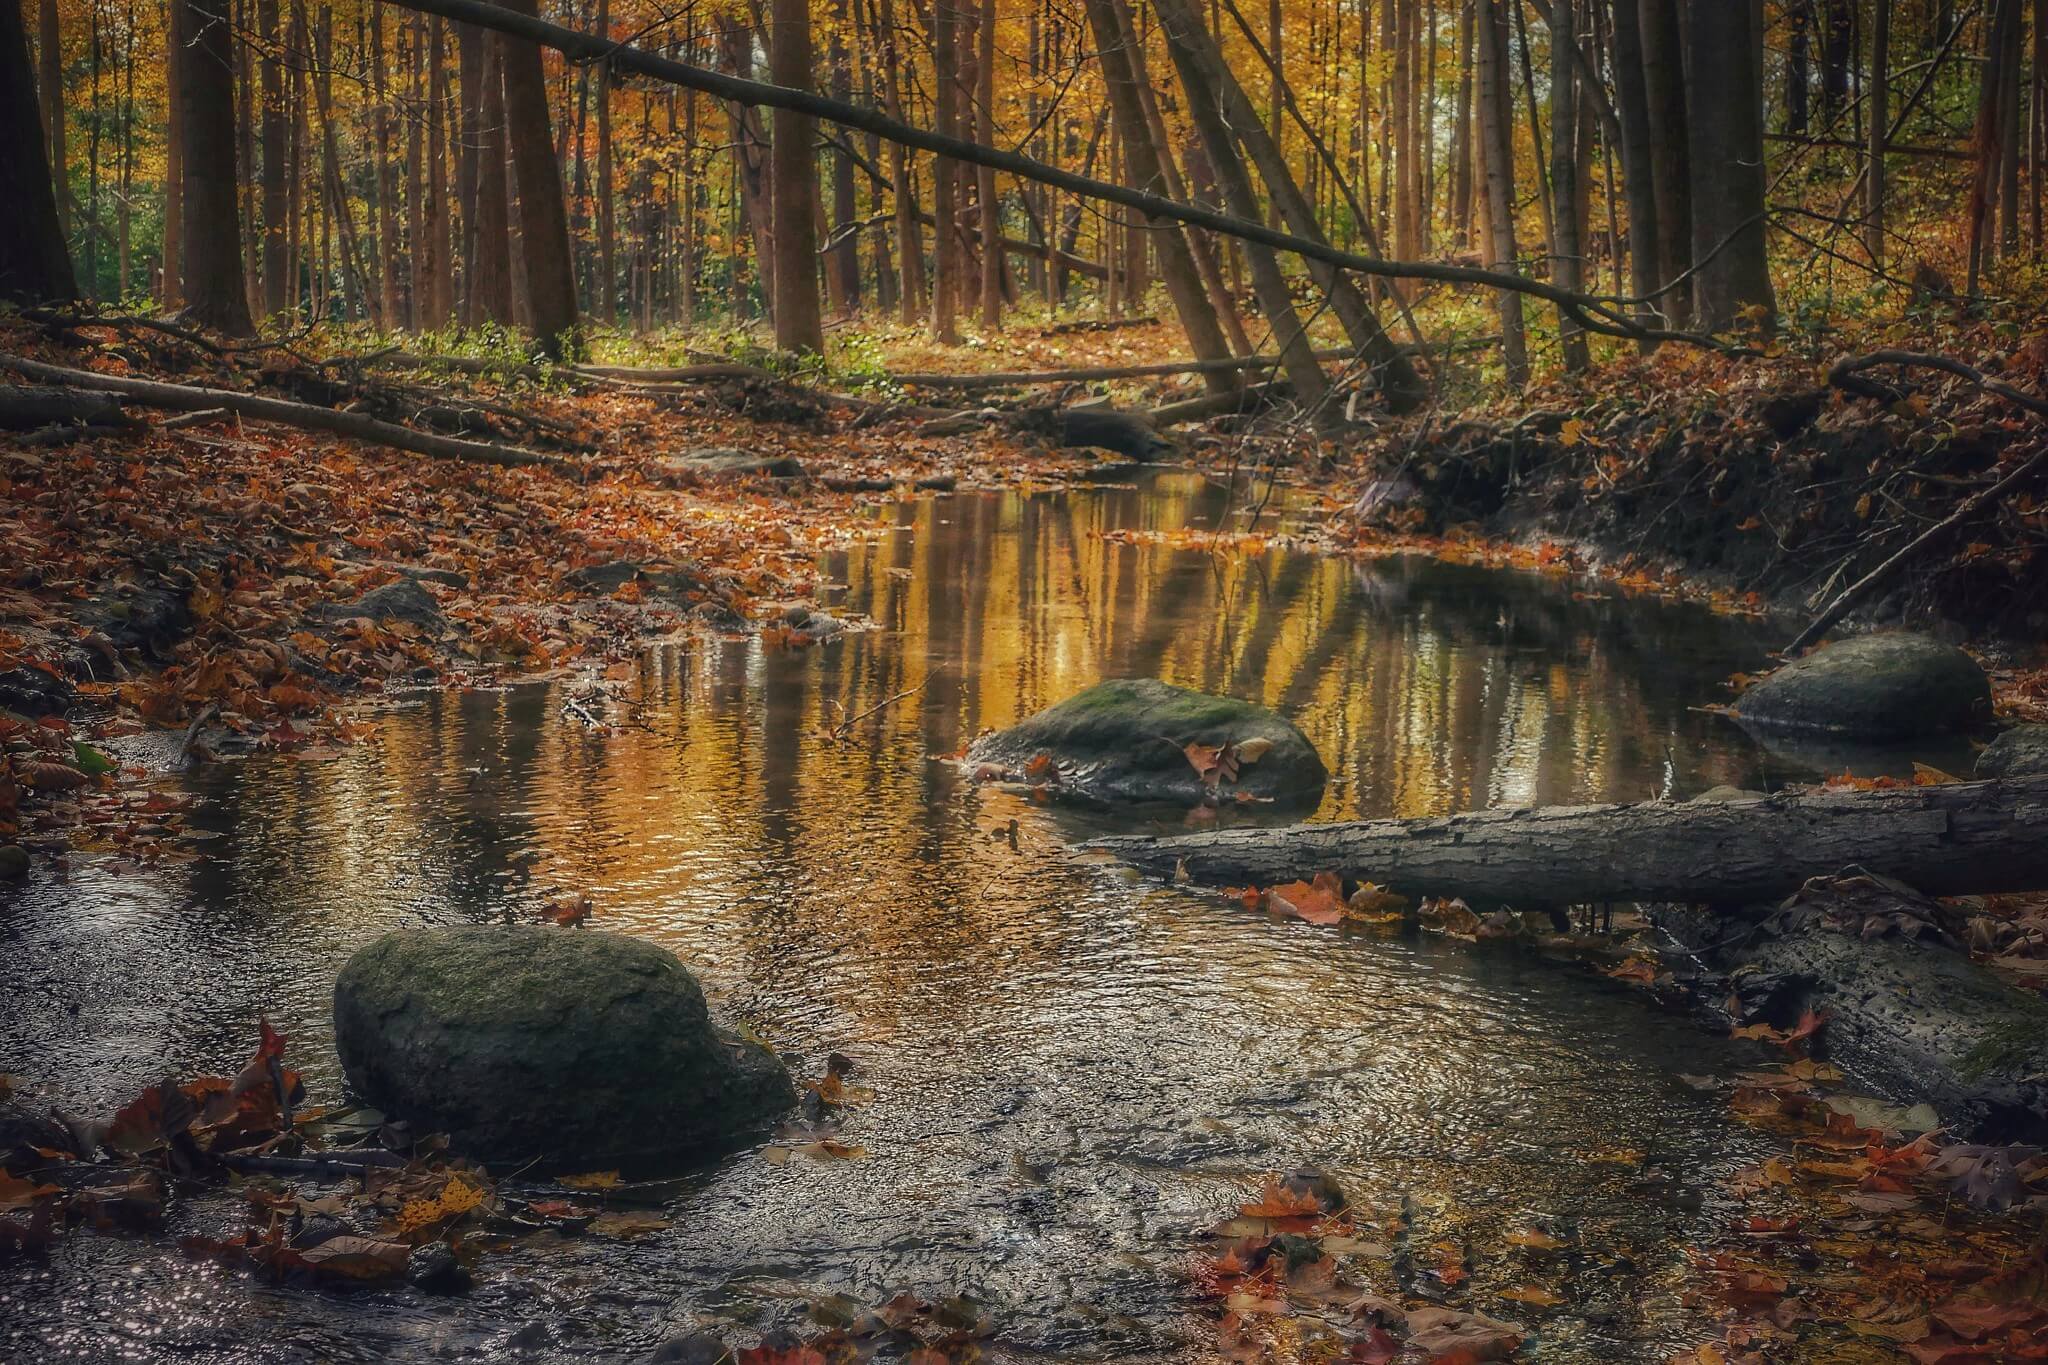 Knowles-Nelson Stewardship Program - dark and dense forest area in fall with muddy brown water amidst dozens of skinny brown trees trunks and a reflection of yellow leaves off the water